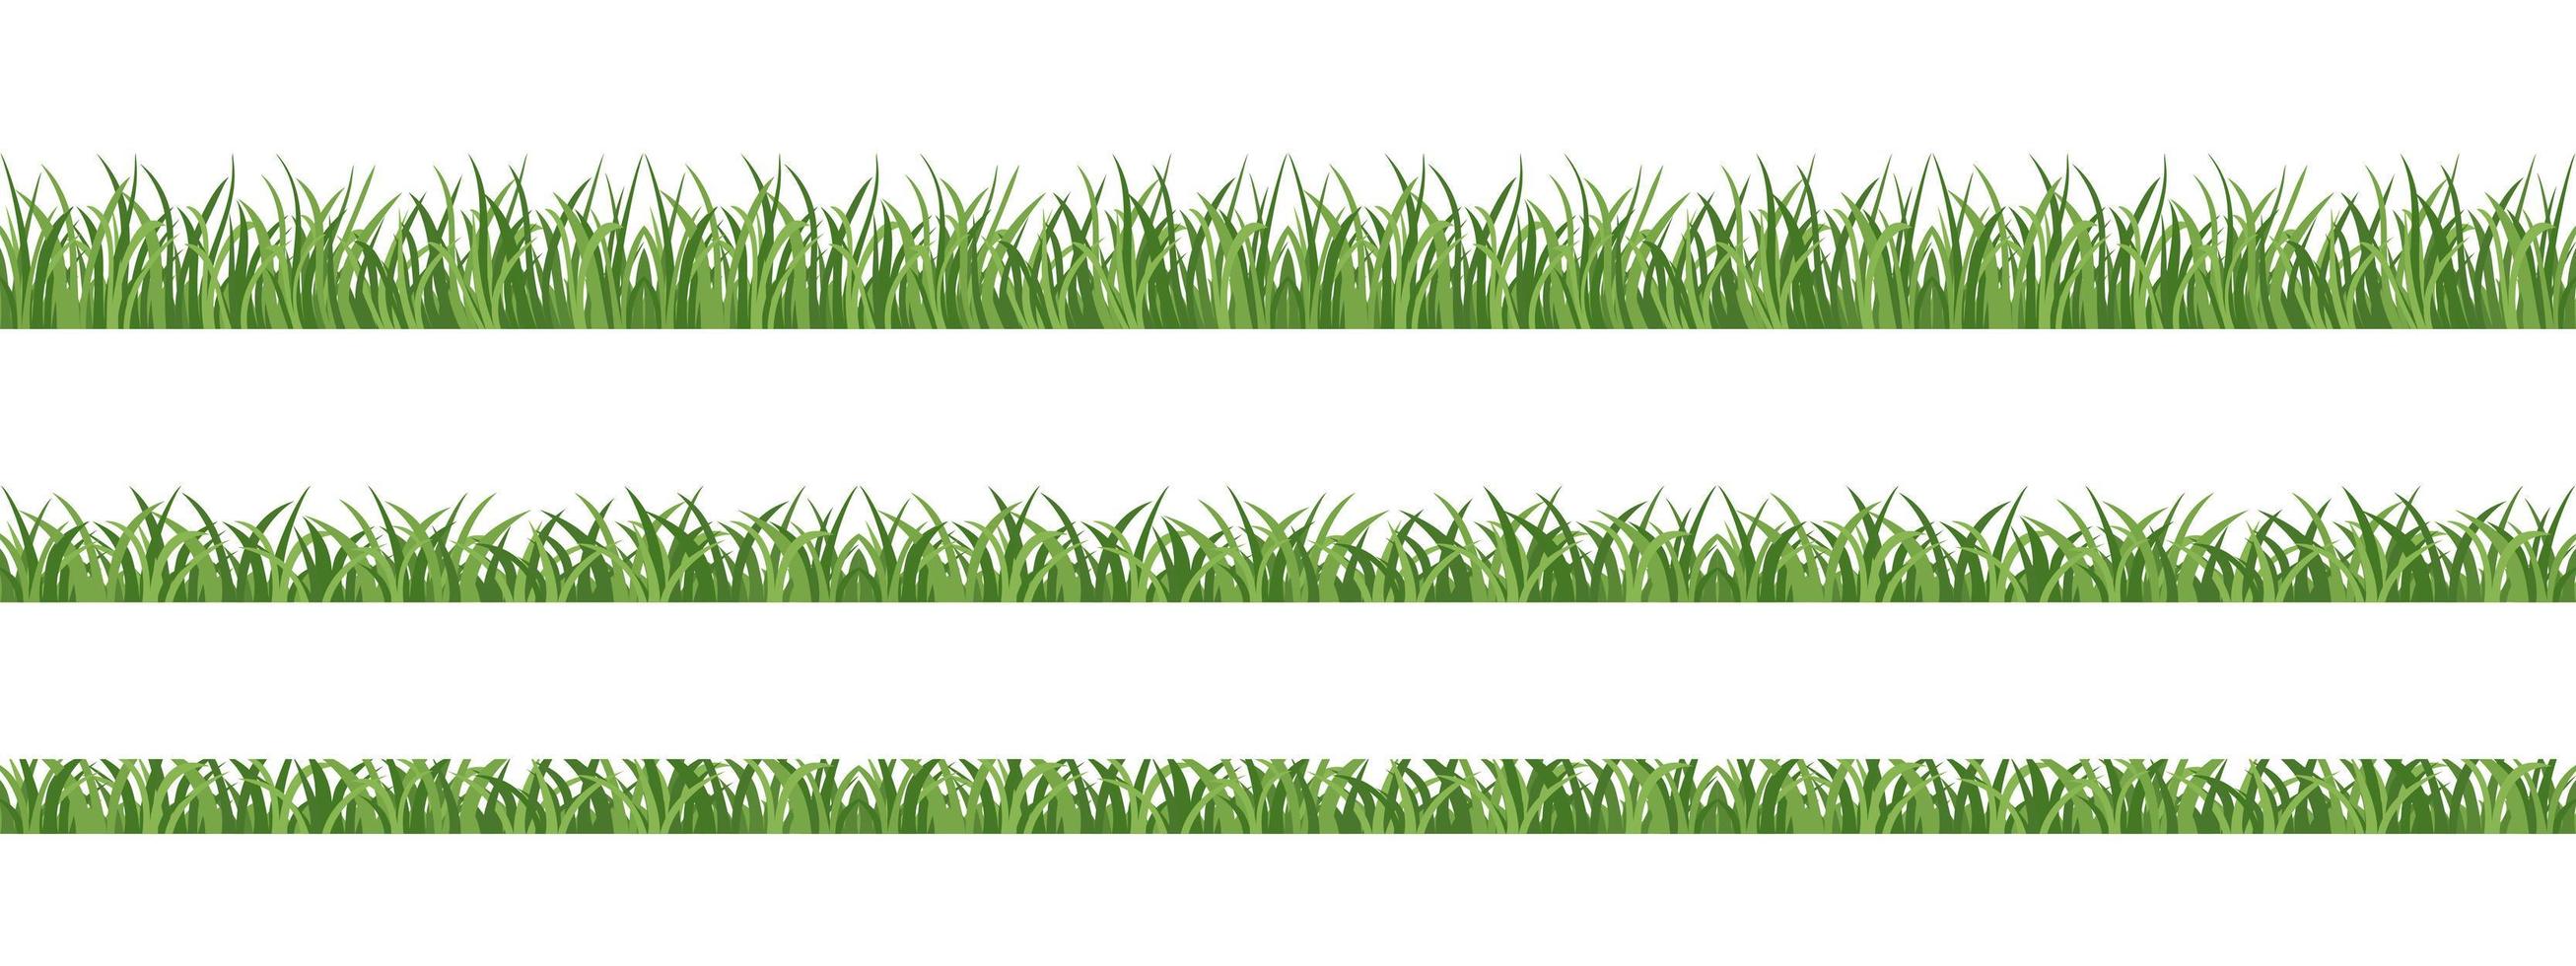 Seamless lawn grass. Elements for spring design, frames, decoration. vector